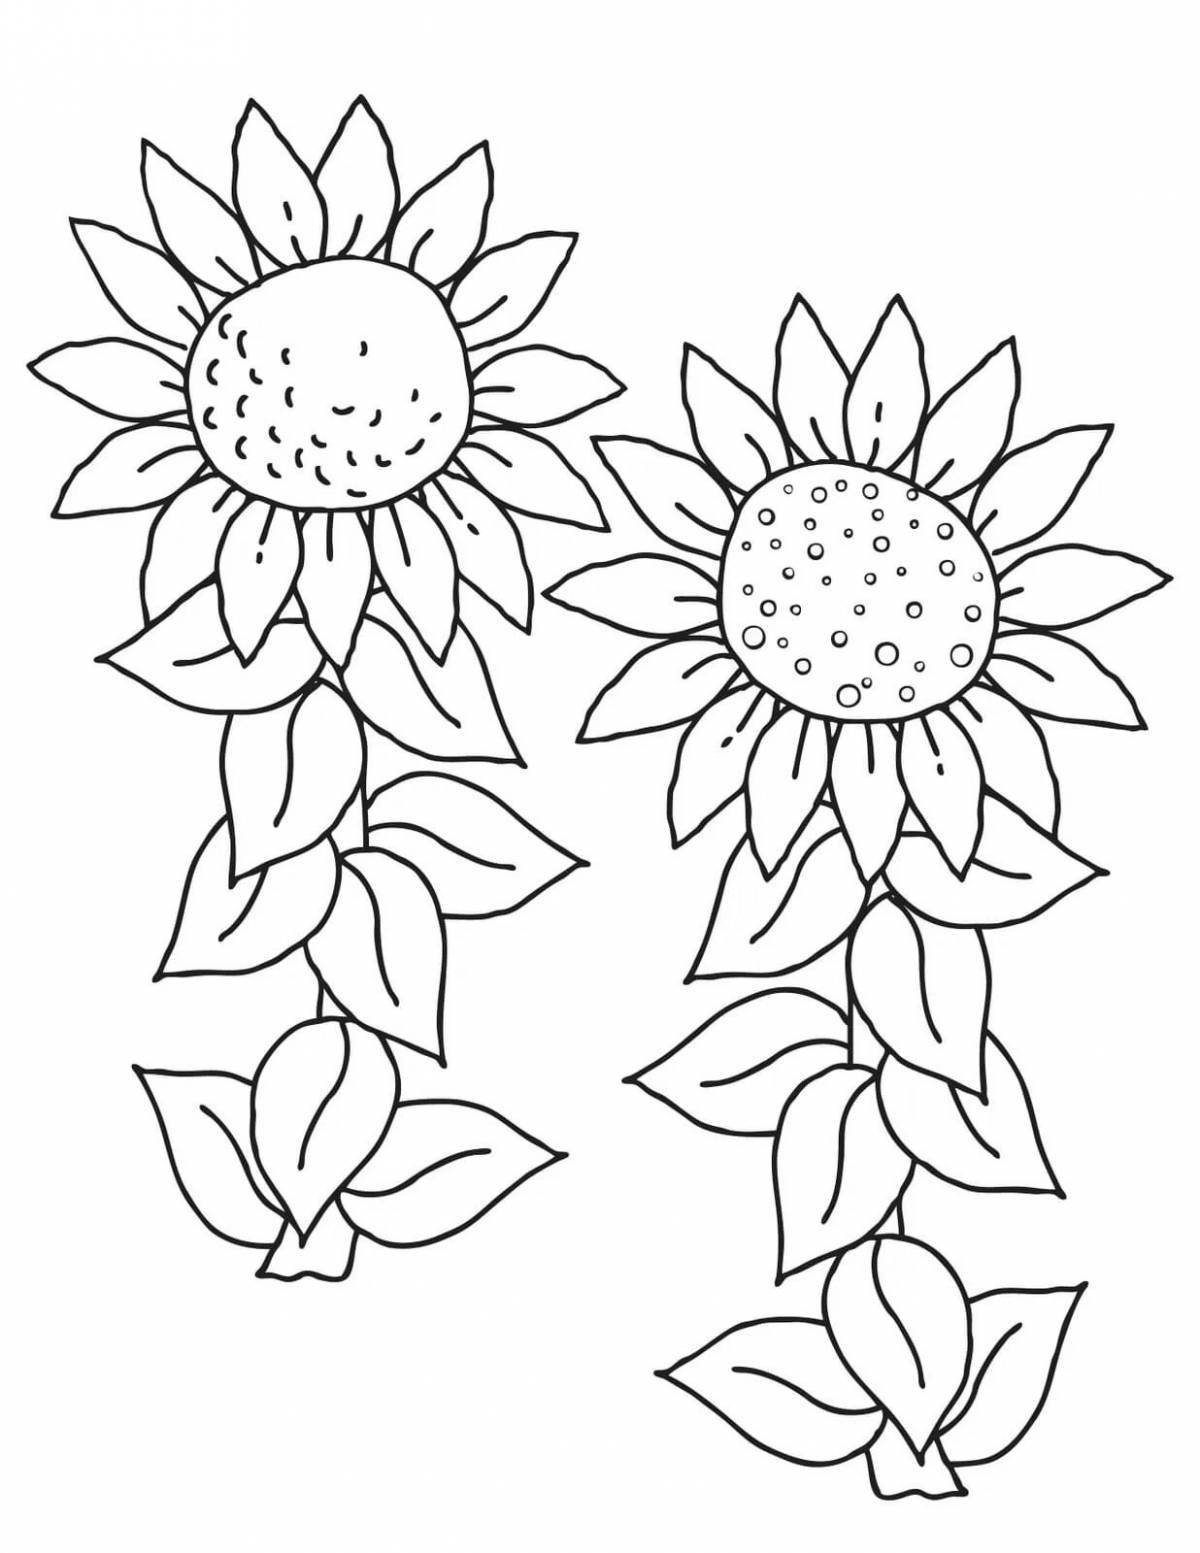 Great sunflower coloring book for kids 2-3 years old